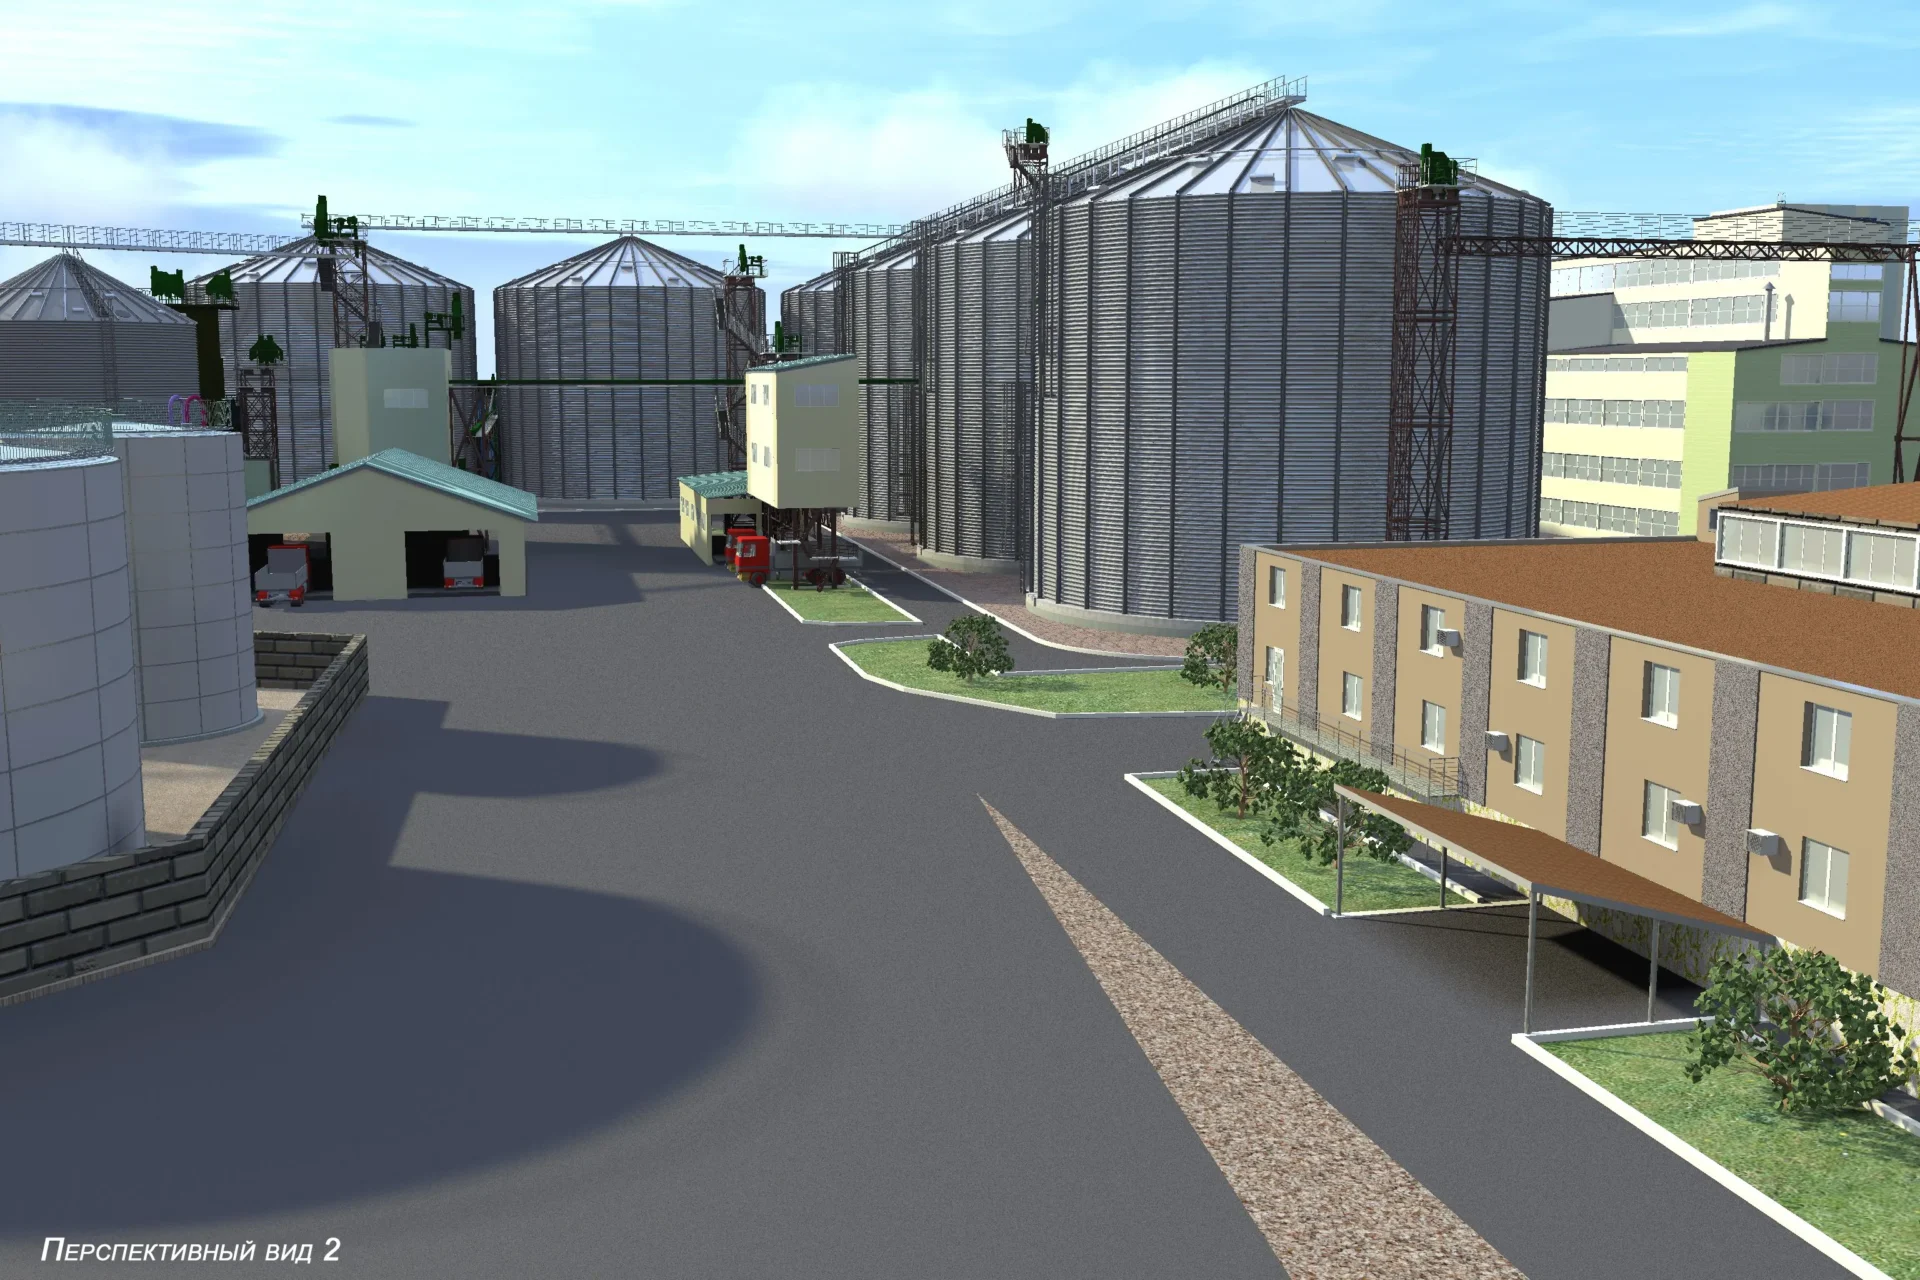 Reconstruction of the oil extraction plant (MEZ) in Mariupol